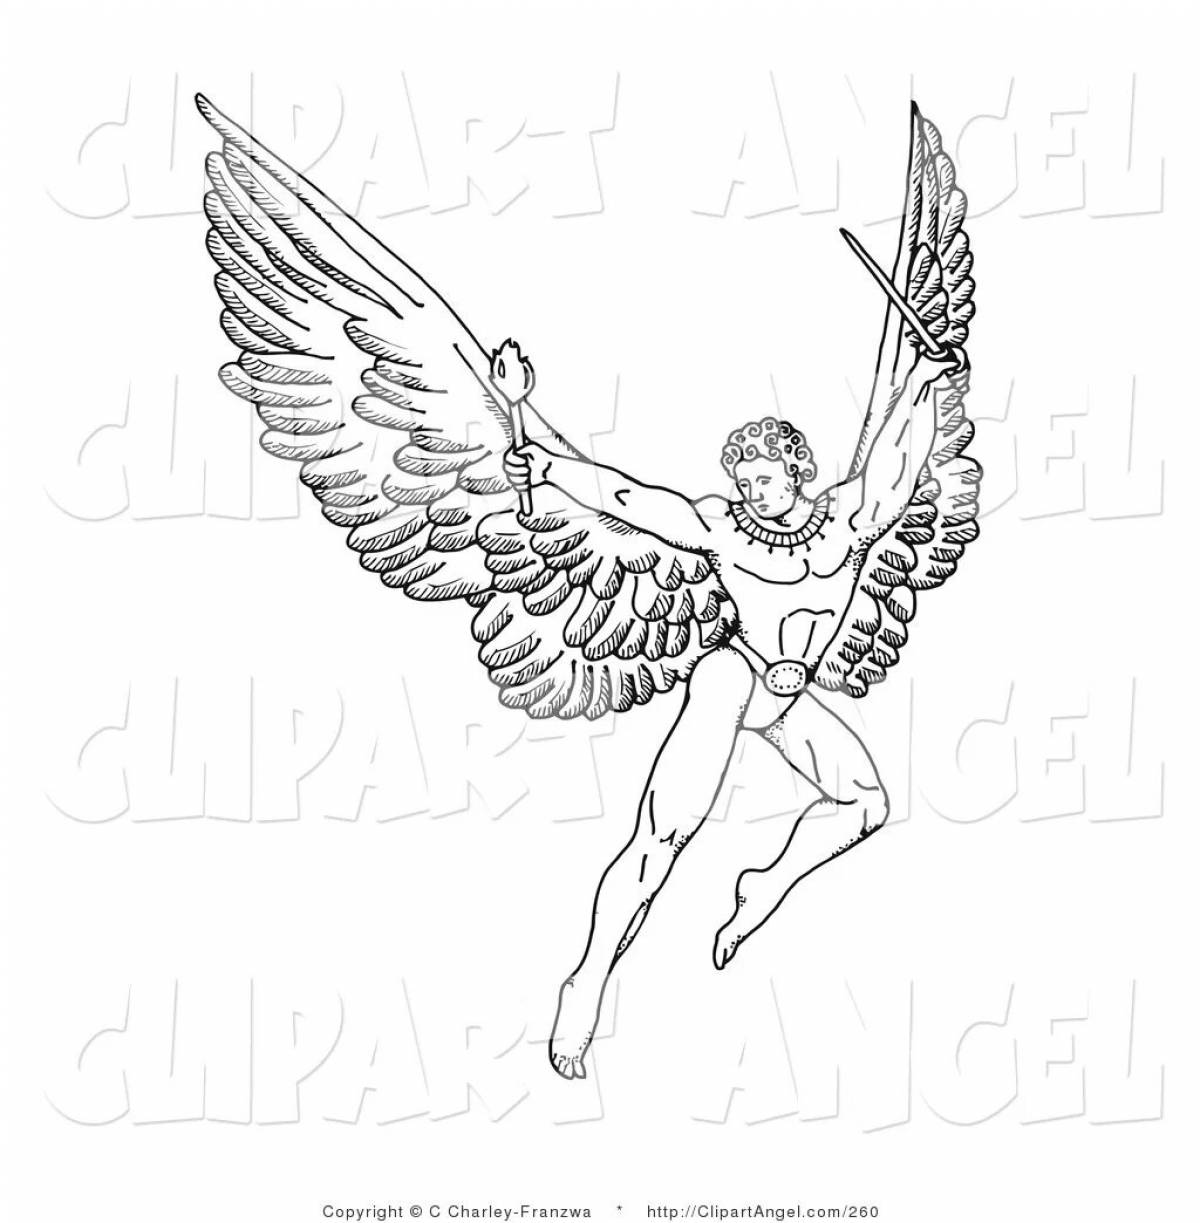 Colorfully decorated Daedalus and Icarus coloring book